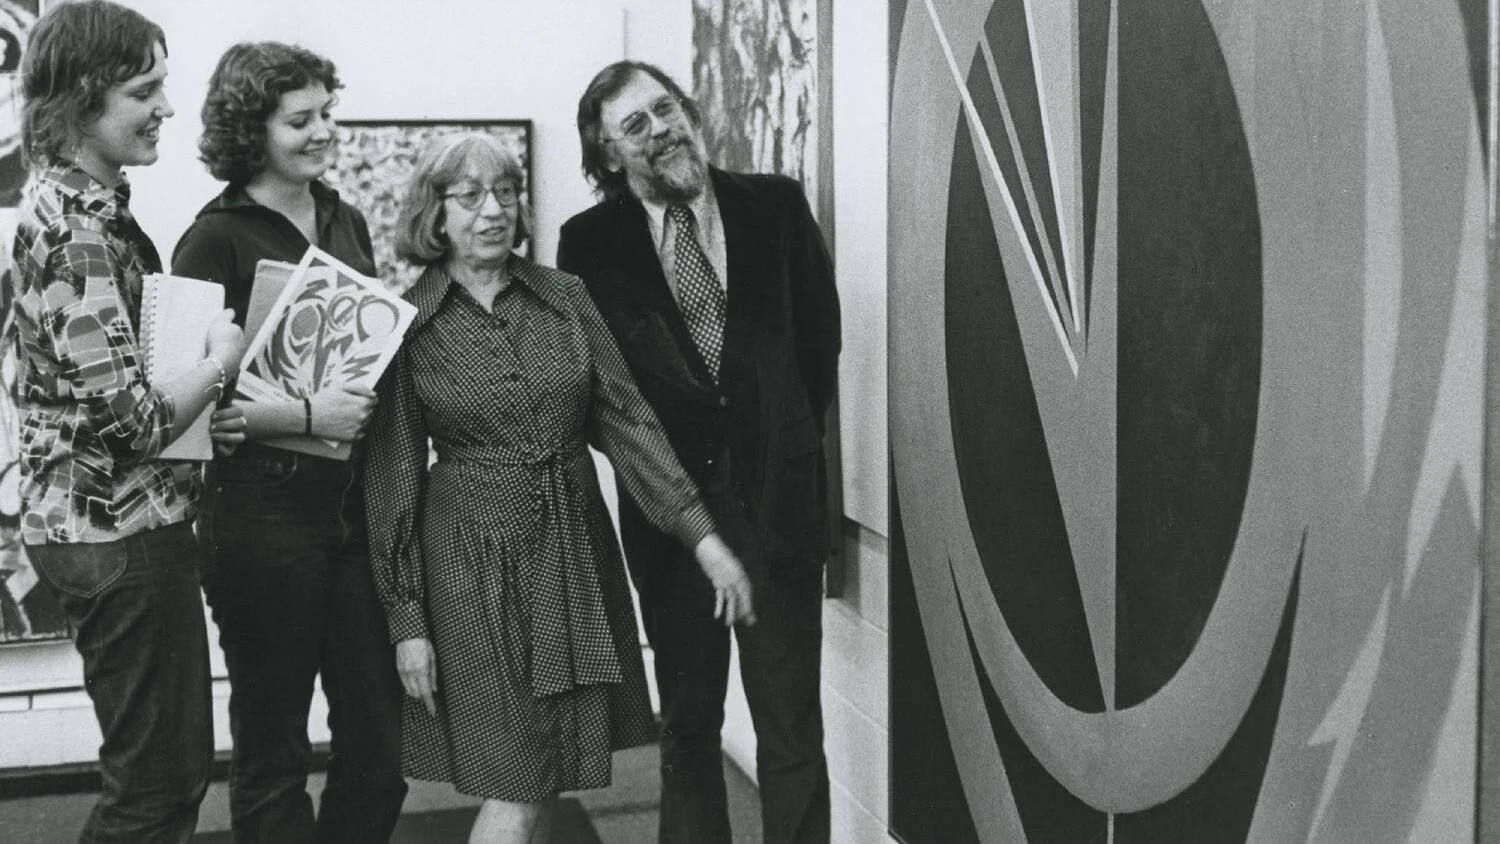 Four people viewing a large piece of artwork on the wall during an exhibition.